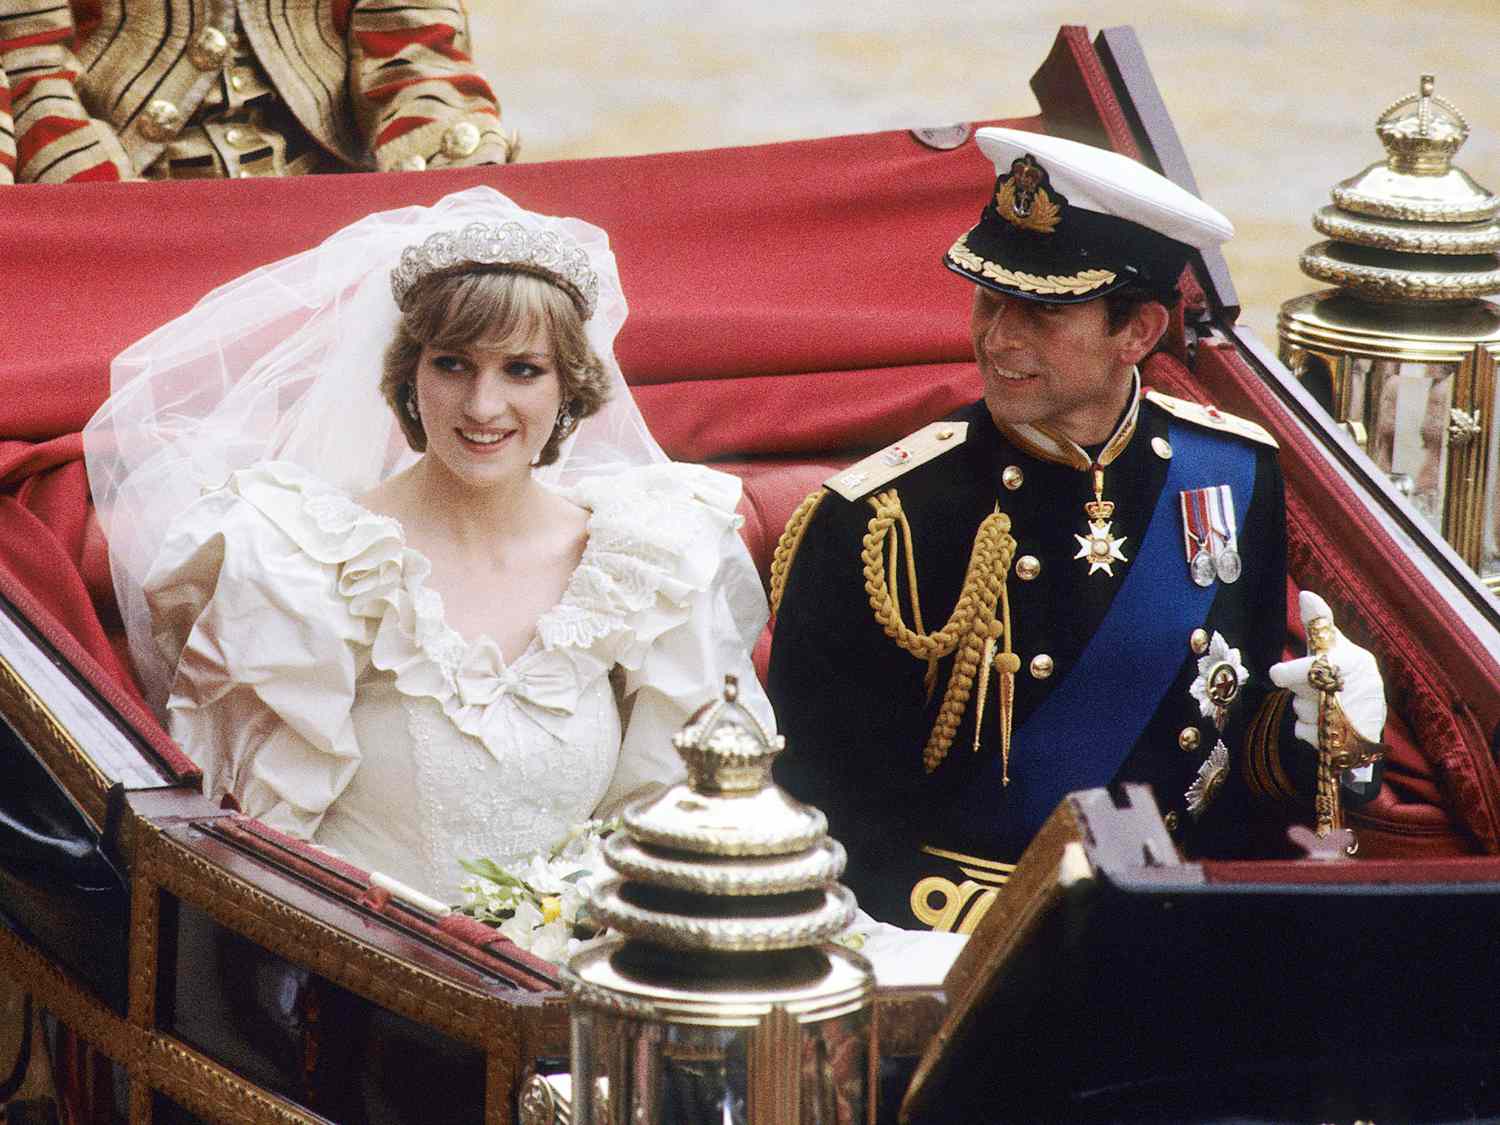 Prince Charles of Wales and Lady Diana Spencer